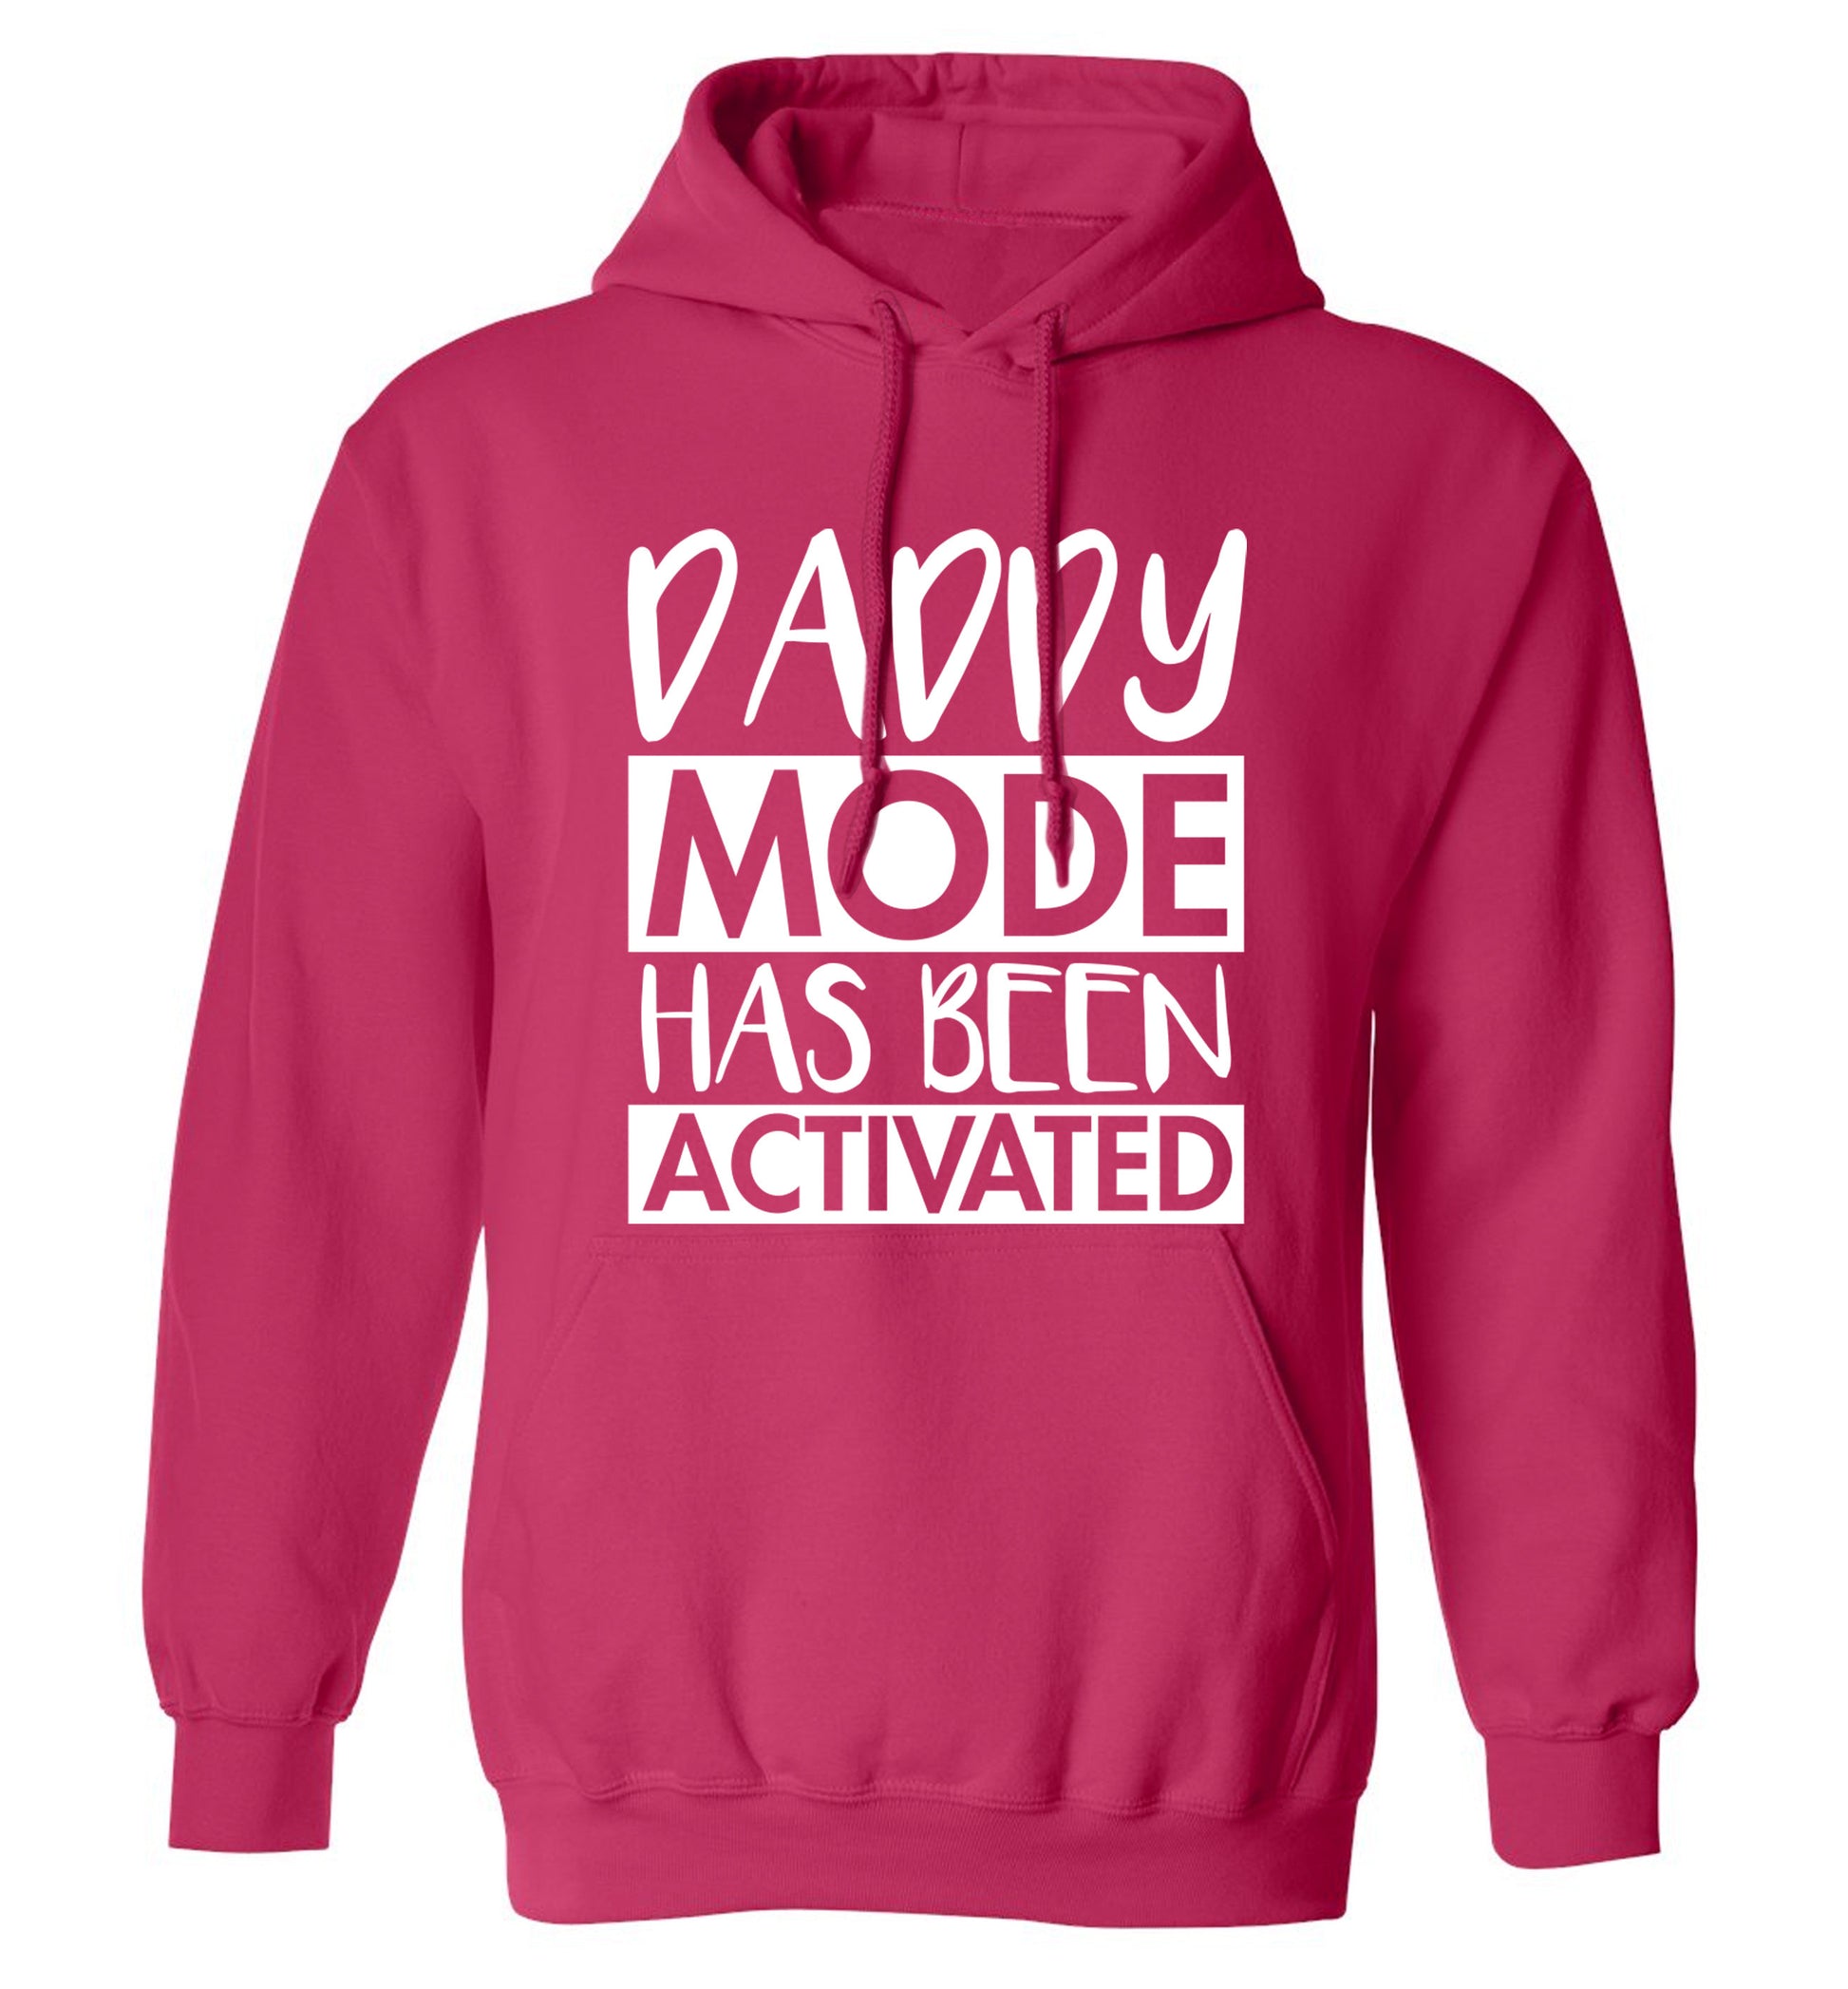 Daddy mode activated adults unisex pink hoodie 2XL